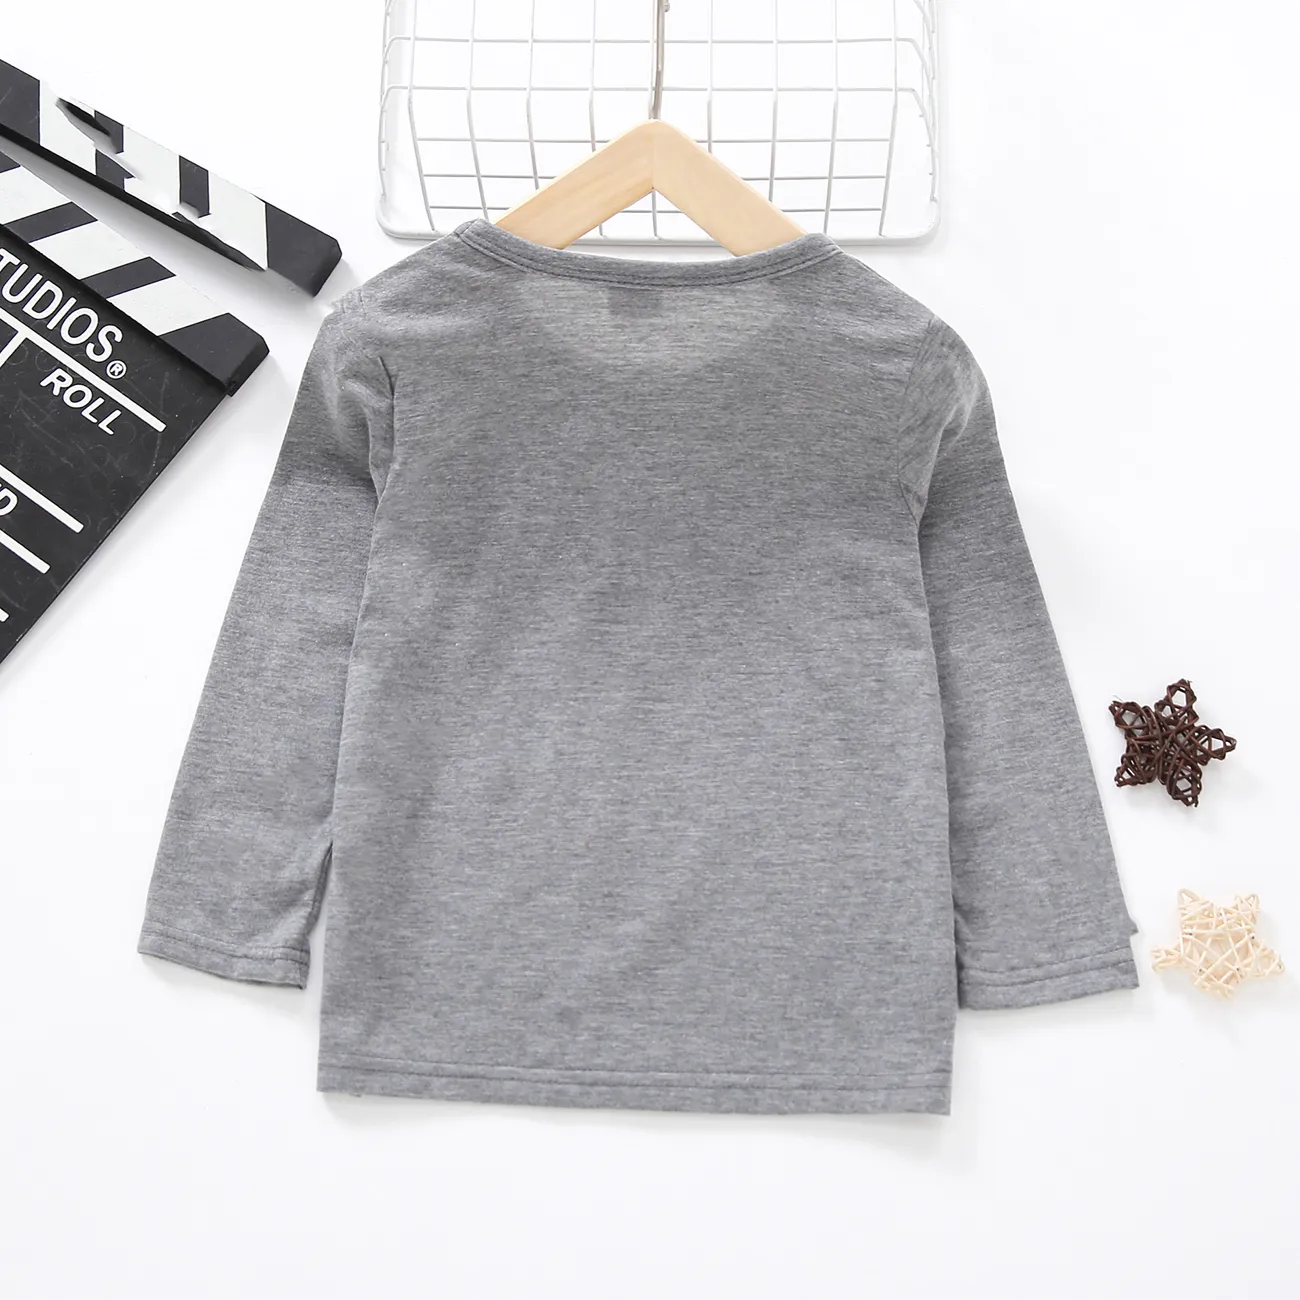 Toddler Boy Casual Letter Print Long-sleeve Tee Grey big image 1